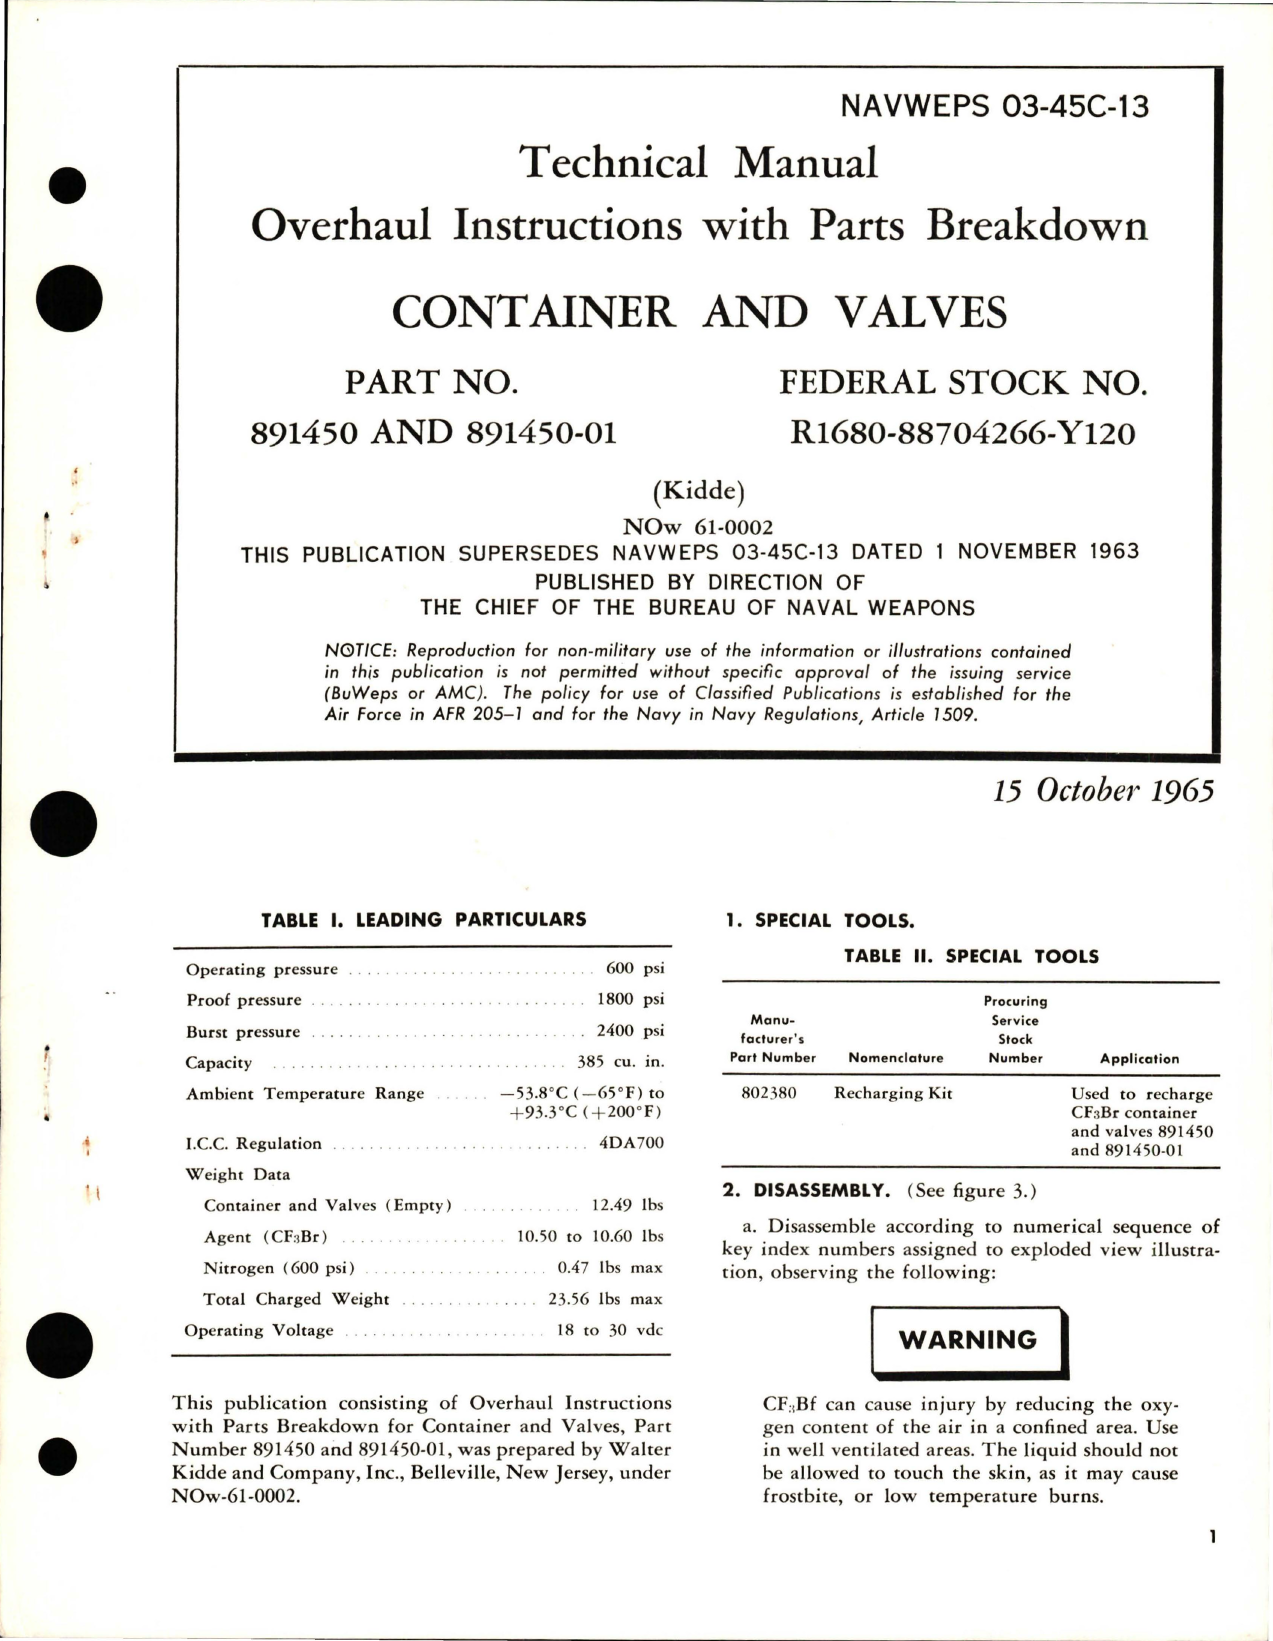 Sample page 1 from AirCorps Library document: Overhaul Instructions with Parts Breakdown for Container and Valves - Parts 891450 and 891450-01 